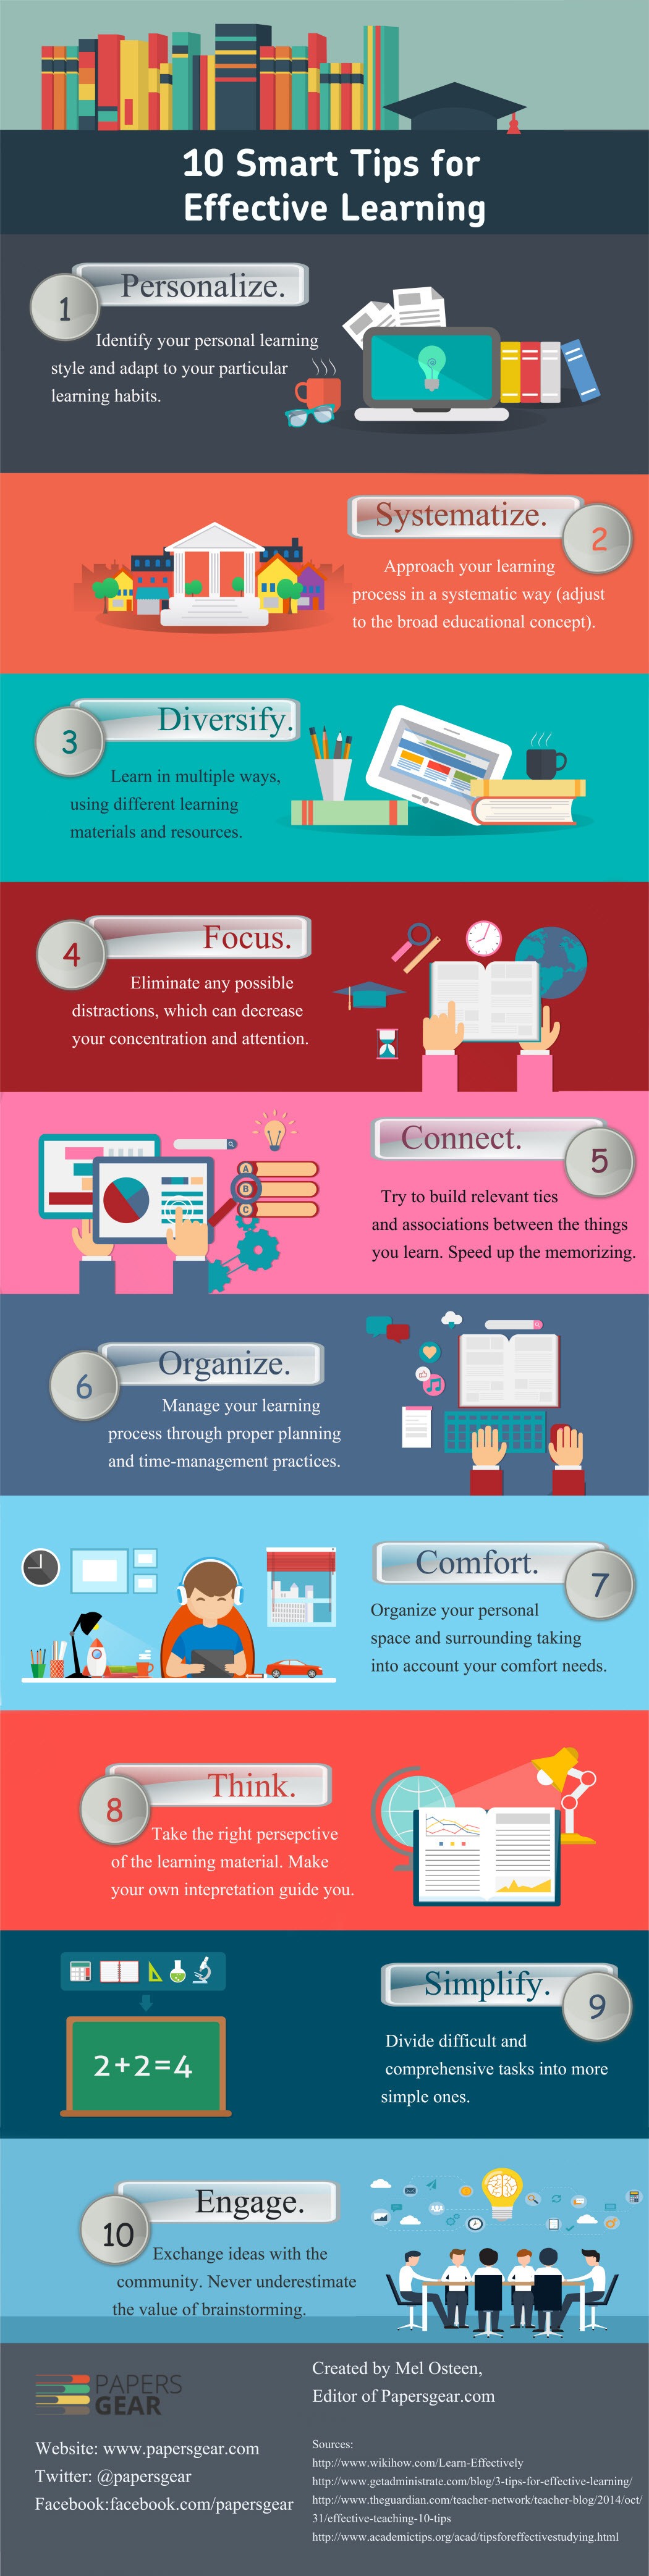 10 Smart Tips for Effective Learning Infographic